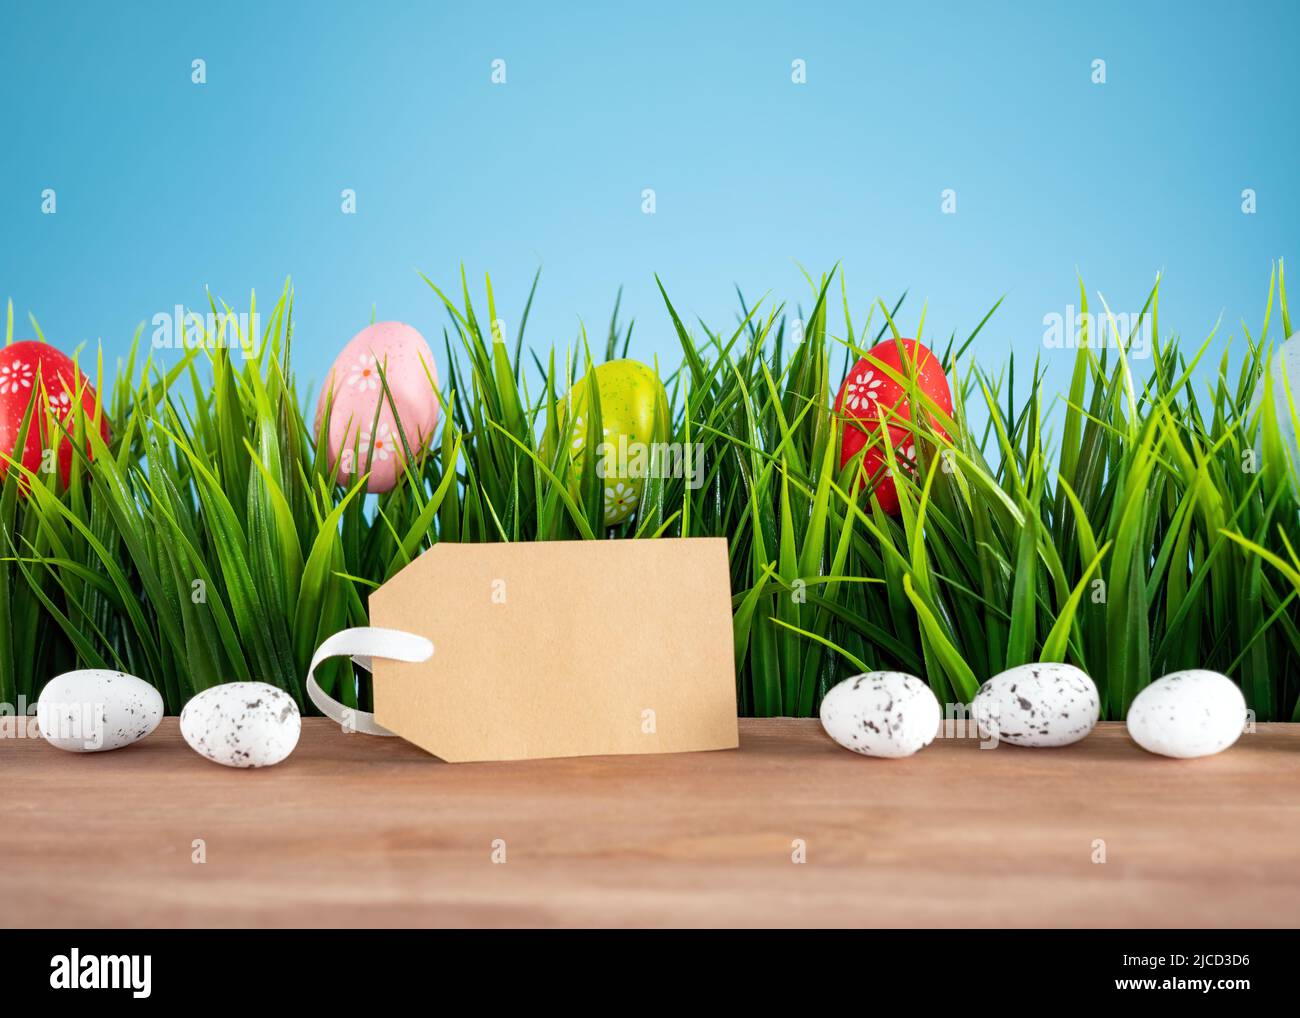 Easter background with colorful eggs, green grass and tag Stock Photo